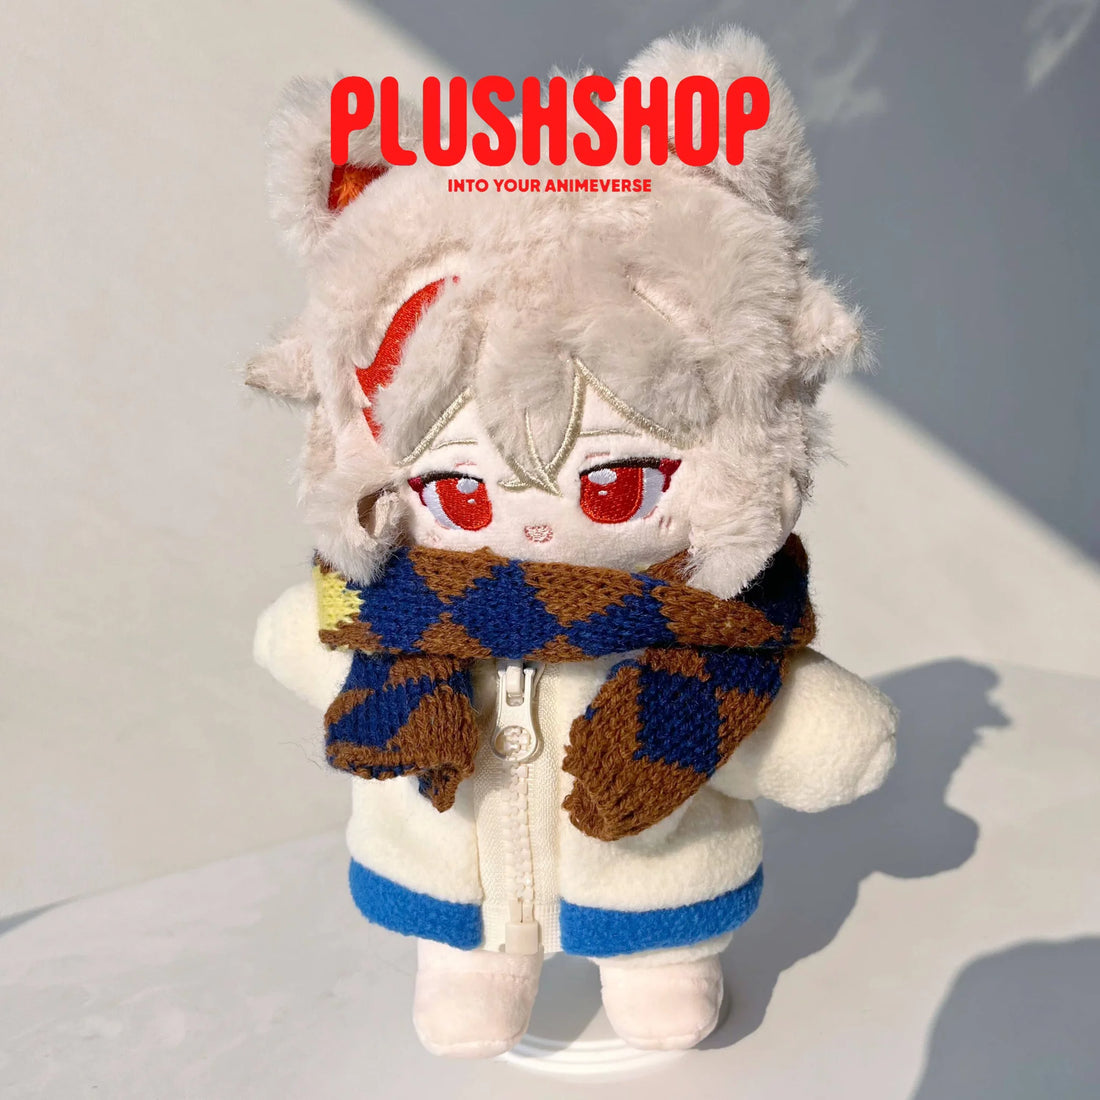 20Cm Kazuha Stuffed Plushie Doll Gifts For Game Fans Collection With Bones And Outfit